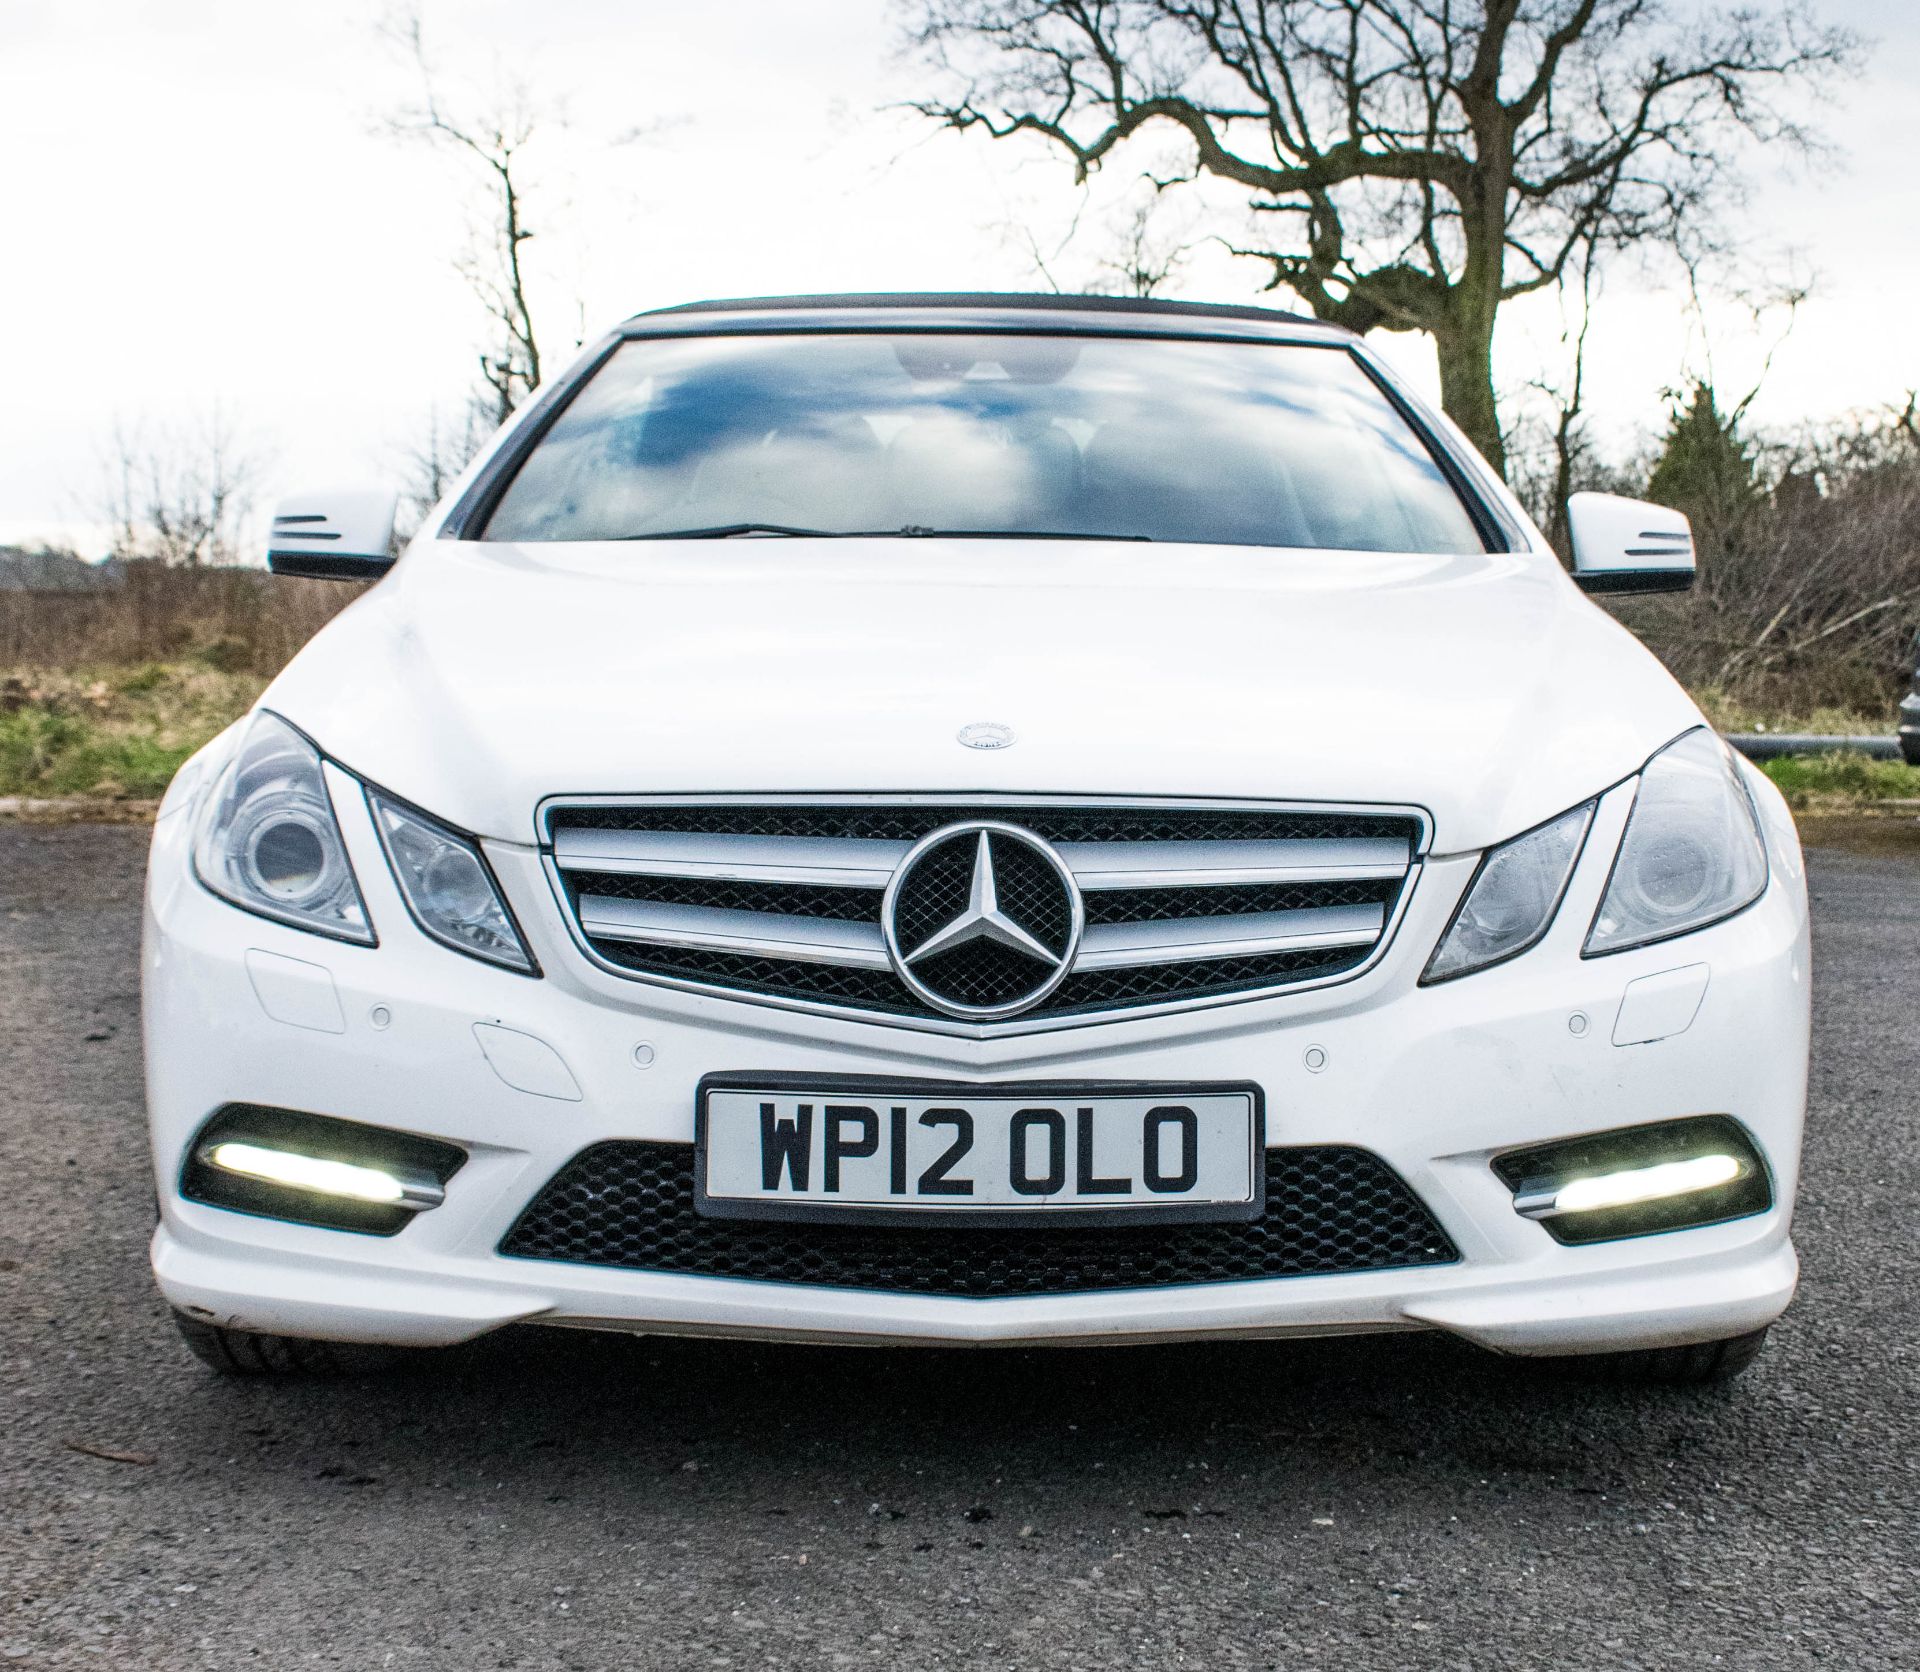 Mercedes Benz E250 sport CDI diesel convertible car Registration number: WP12 OLO Date of - Image 5 of 20